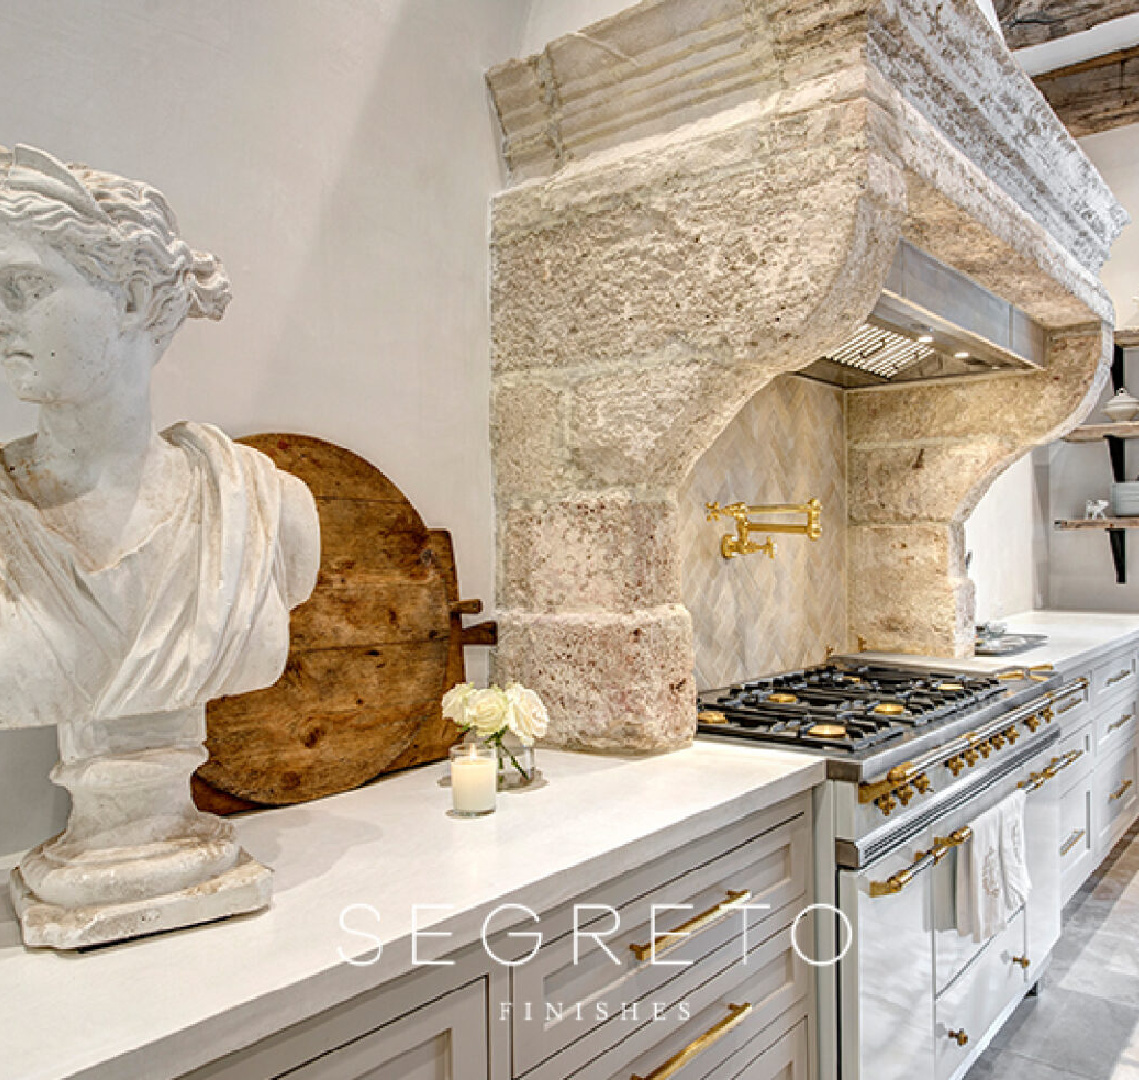 Segreto Finishes French country kitchen with antiques and bespoke design details.